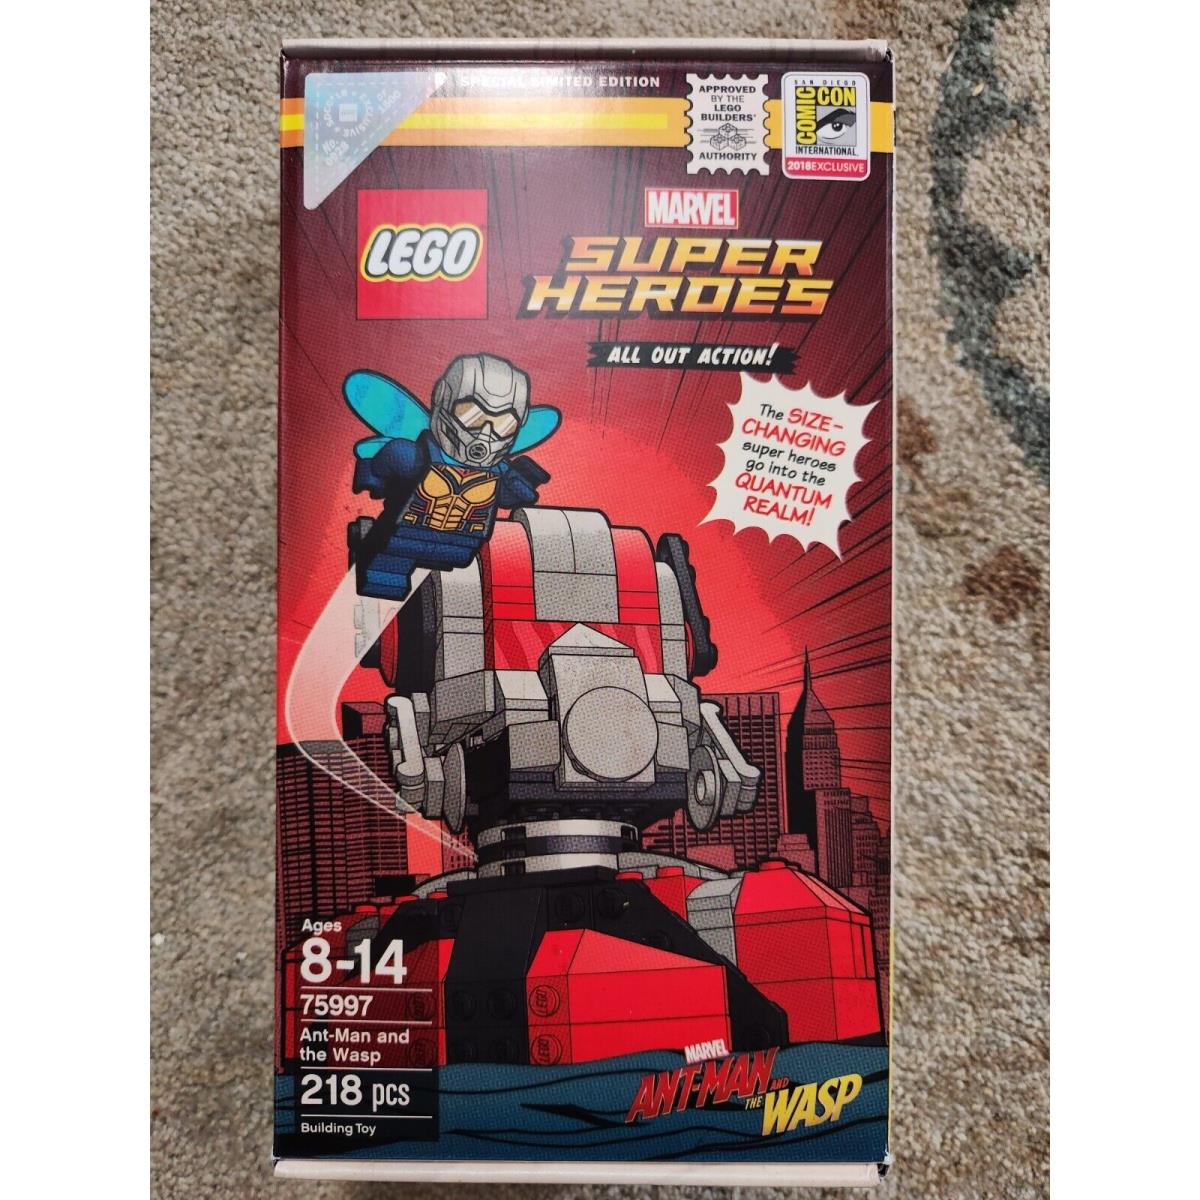 Lego Marvel Super Heroes Ant-man and The Wasp 75997 Sdcc 2018